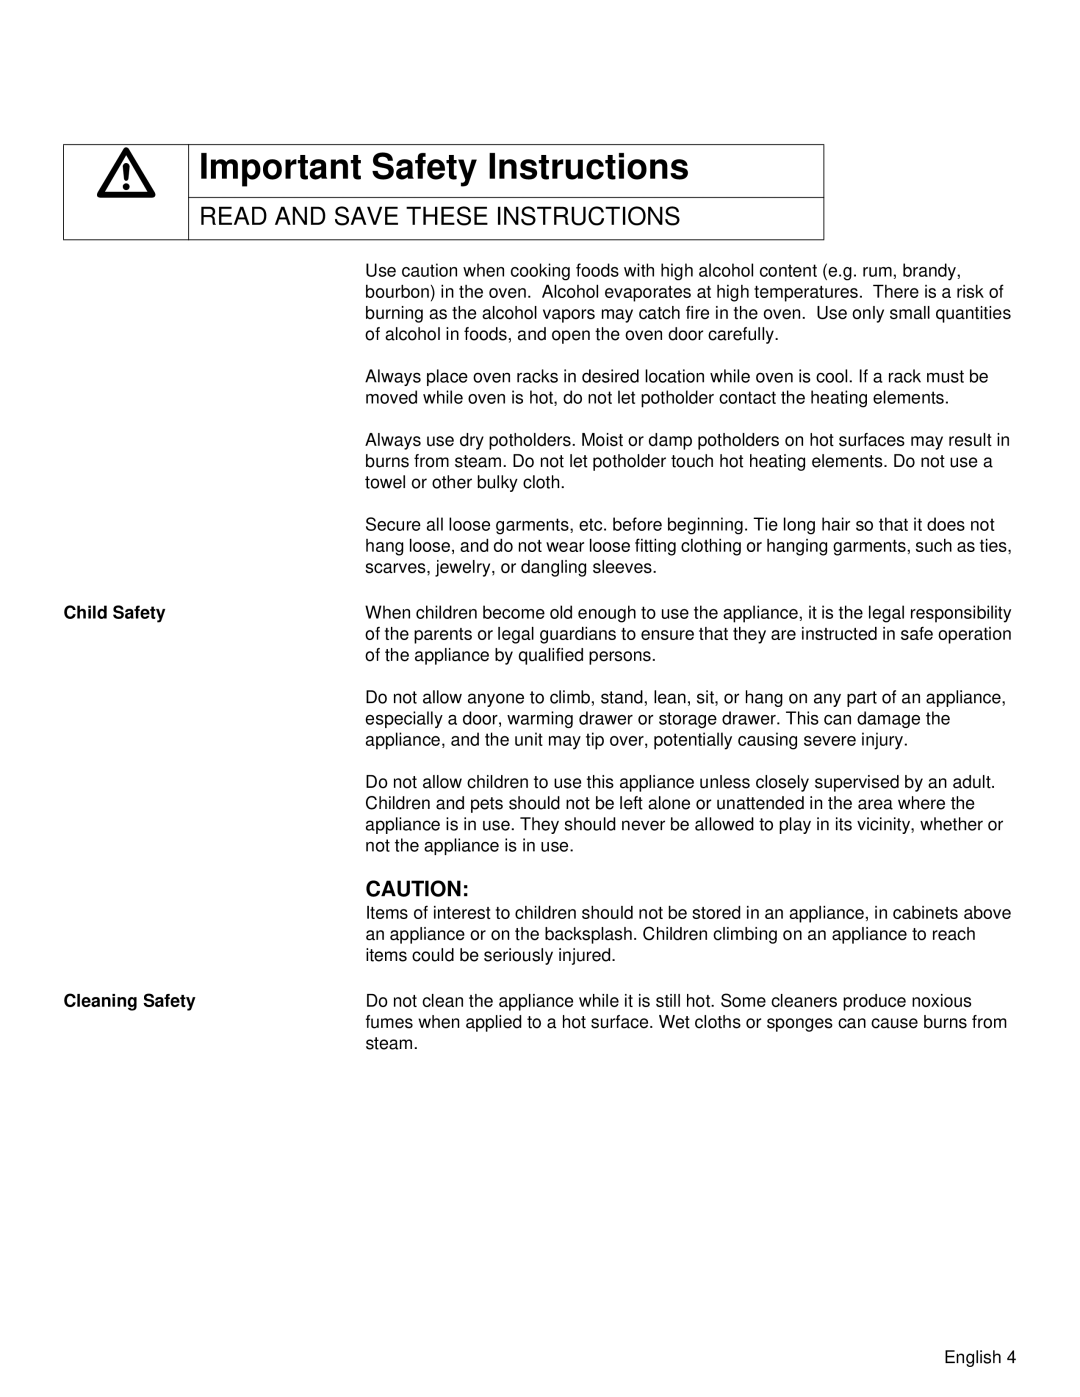 Siemens HB30S51UC manual Important Safety Instructions, Read And Save These Instructions, Child Safety, Cleaning Safety 